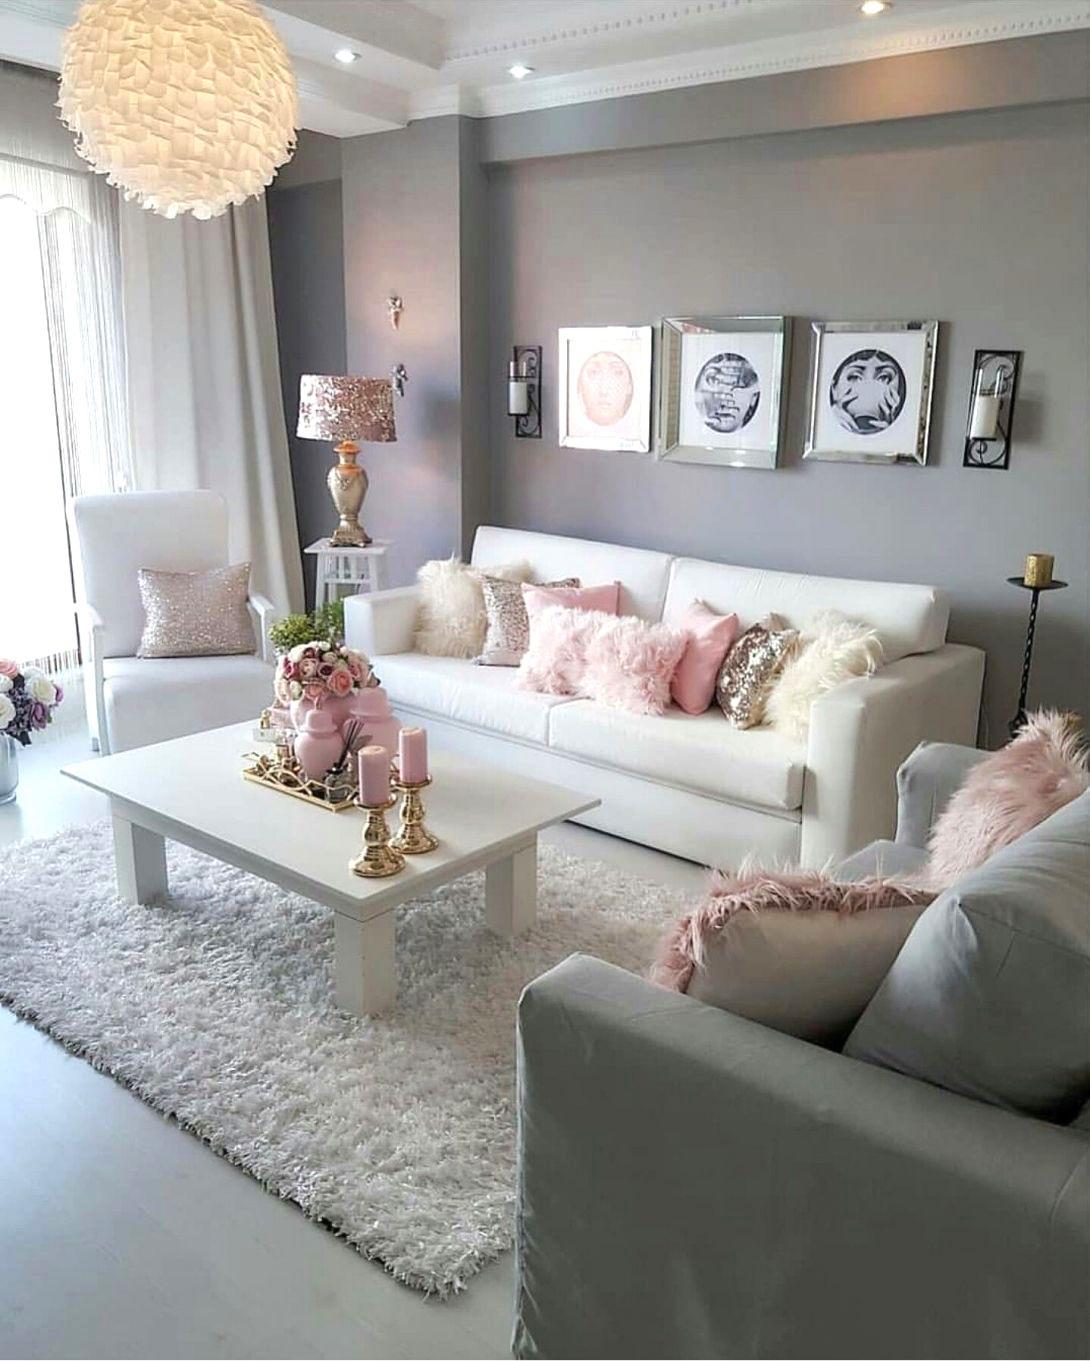 Useful tips and tricks for designing rooms in a cozy fluffy style. Pink tones especially for lovers of everything cute